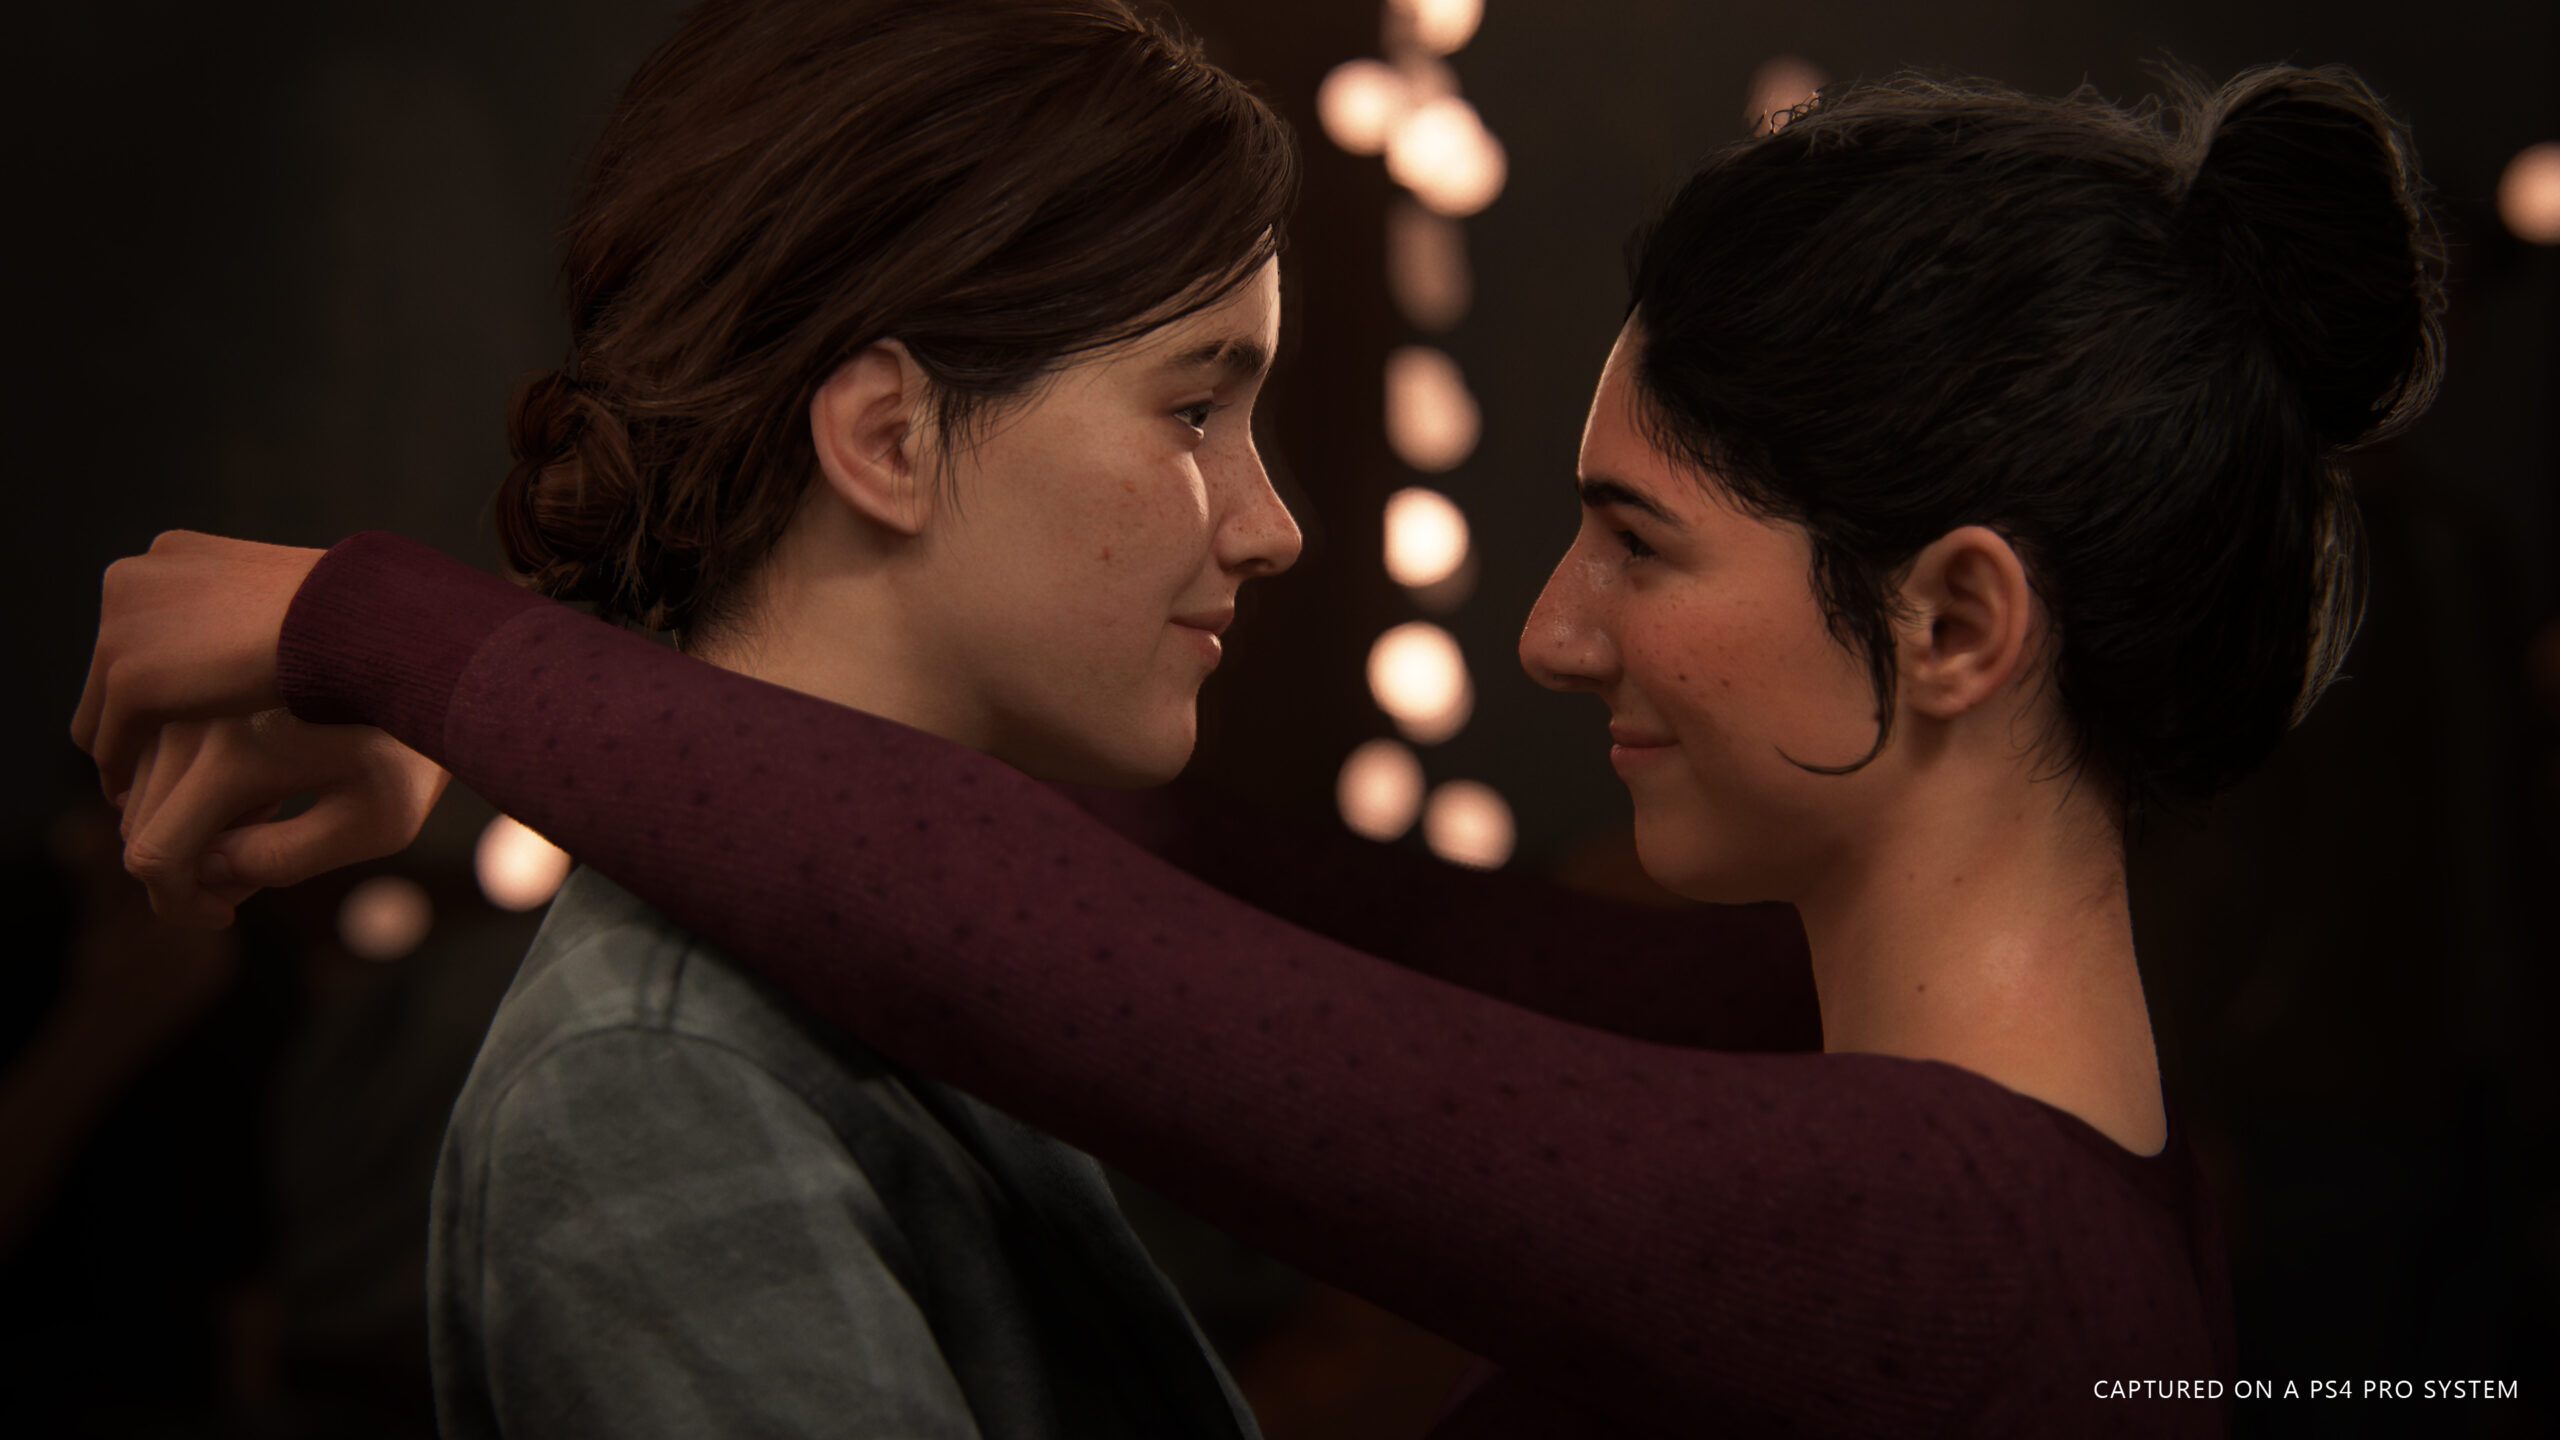 The Last of Us Part II Multiplayer Could Feature Battle Royale